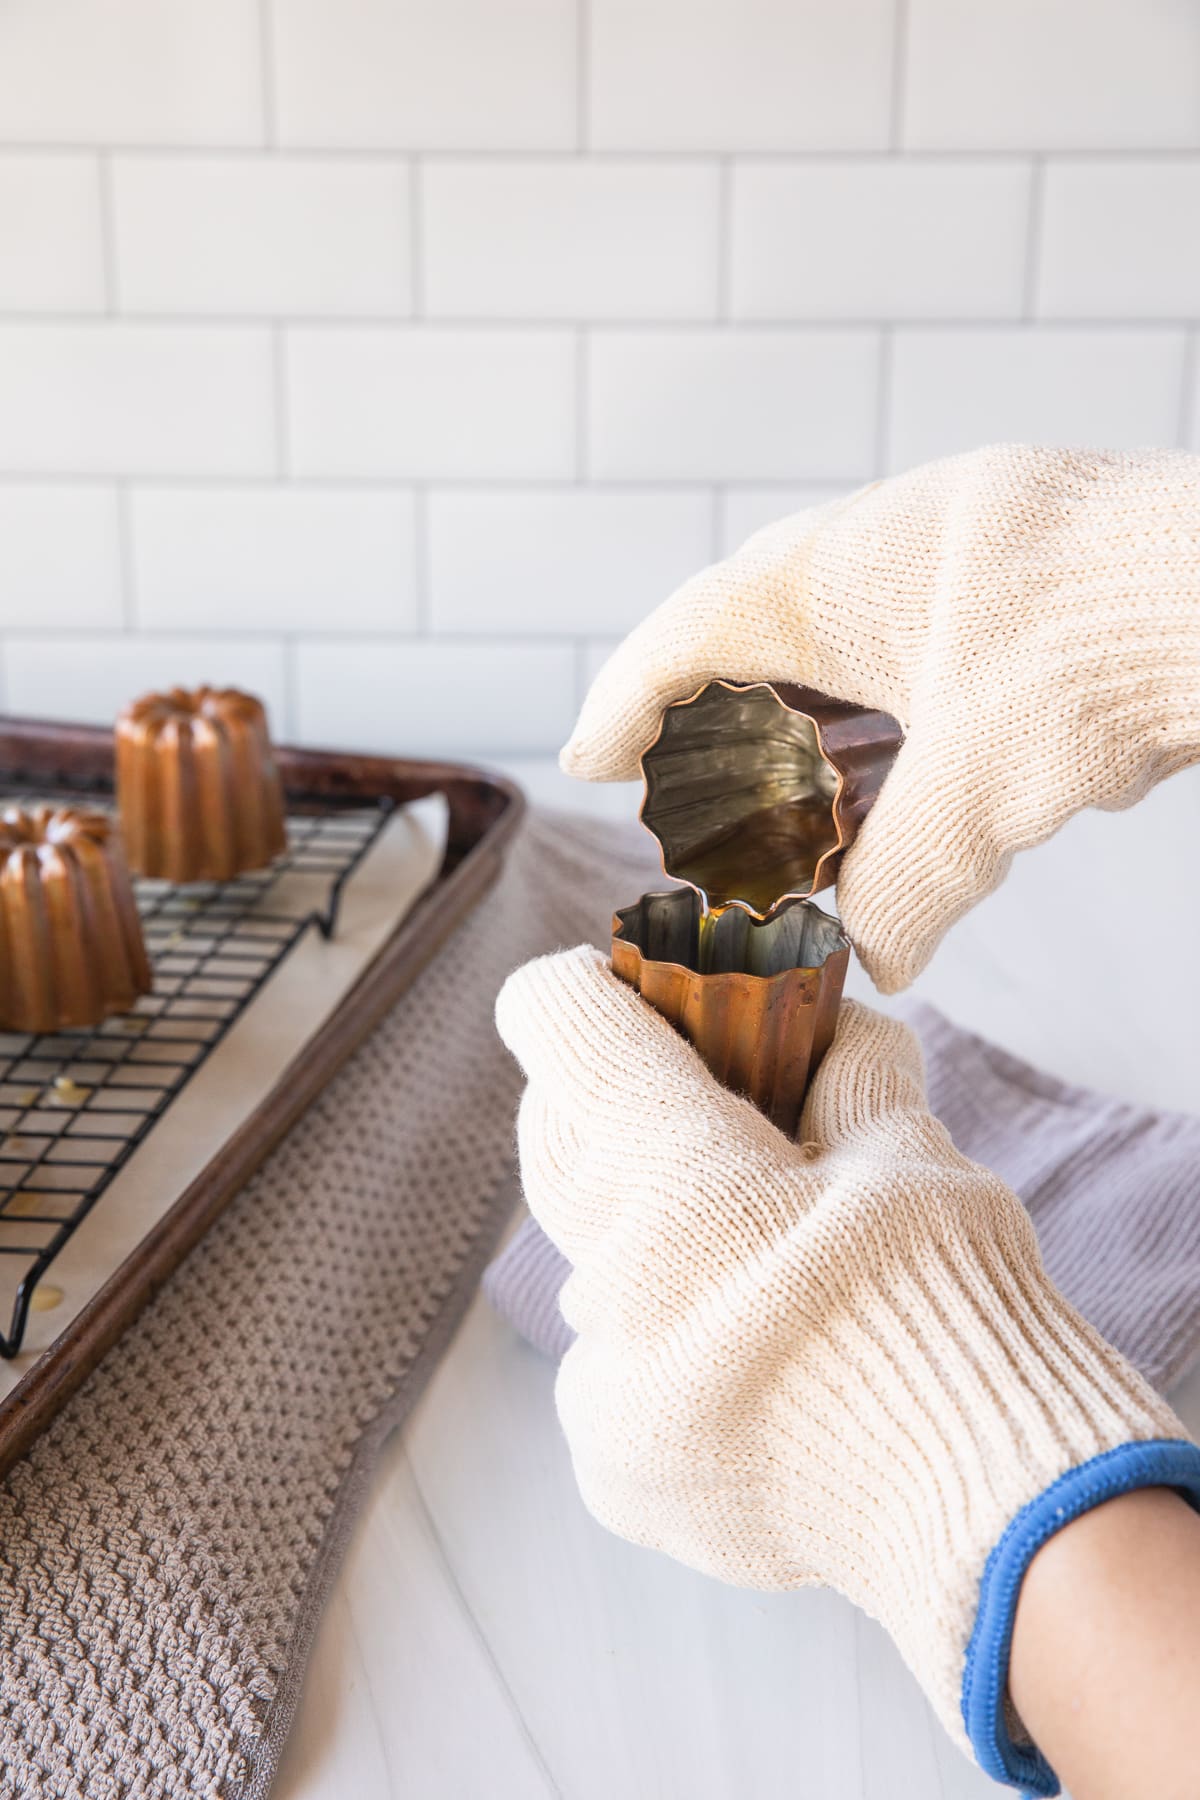 pouring beeswax into canele molds